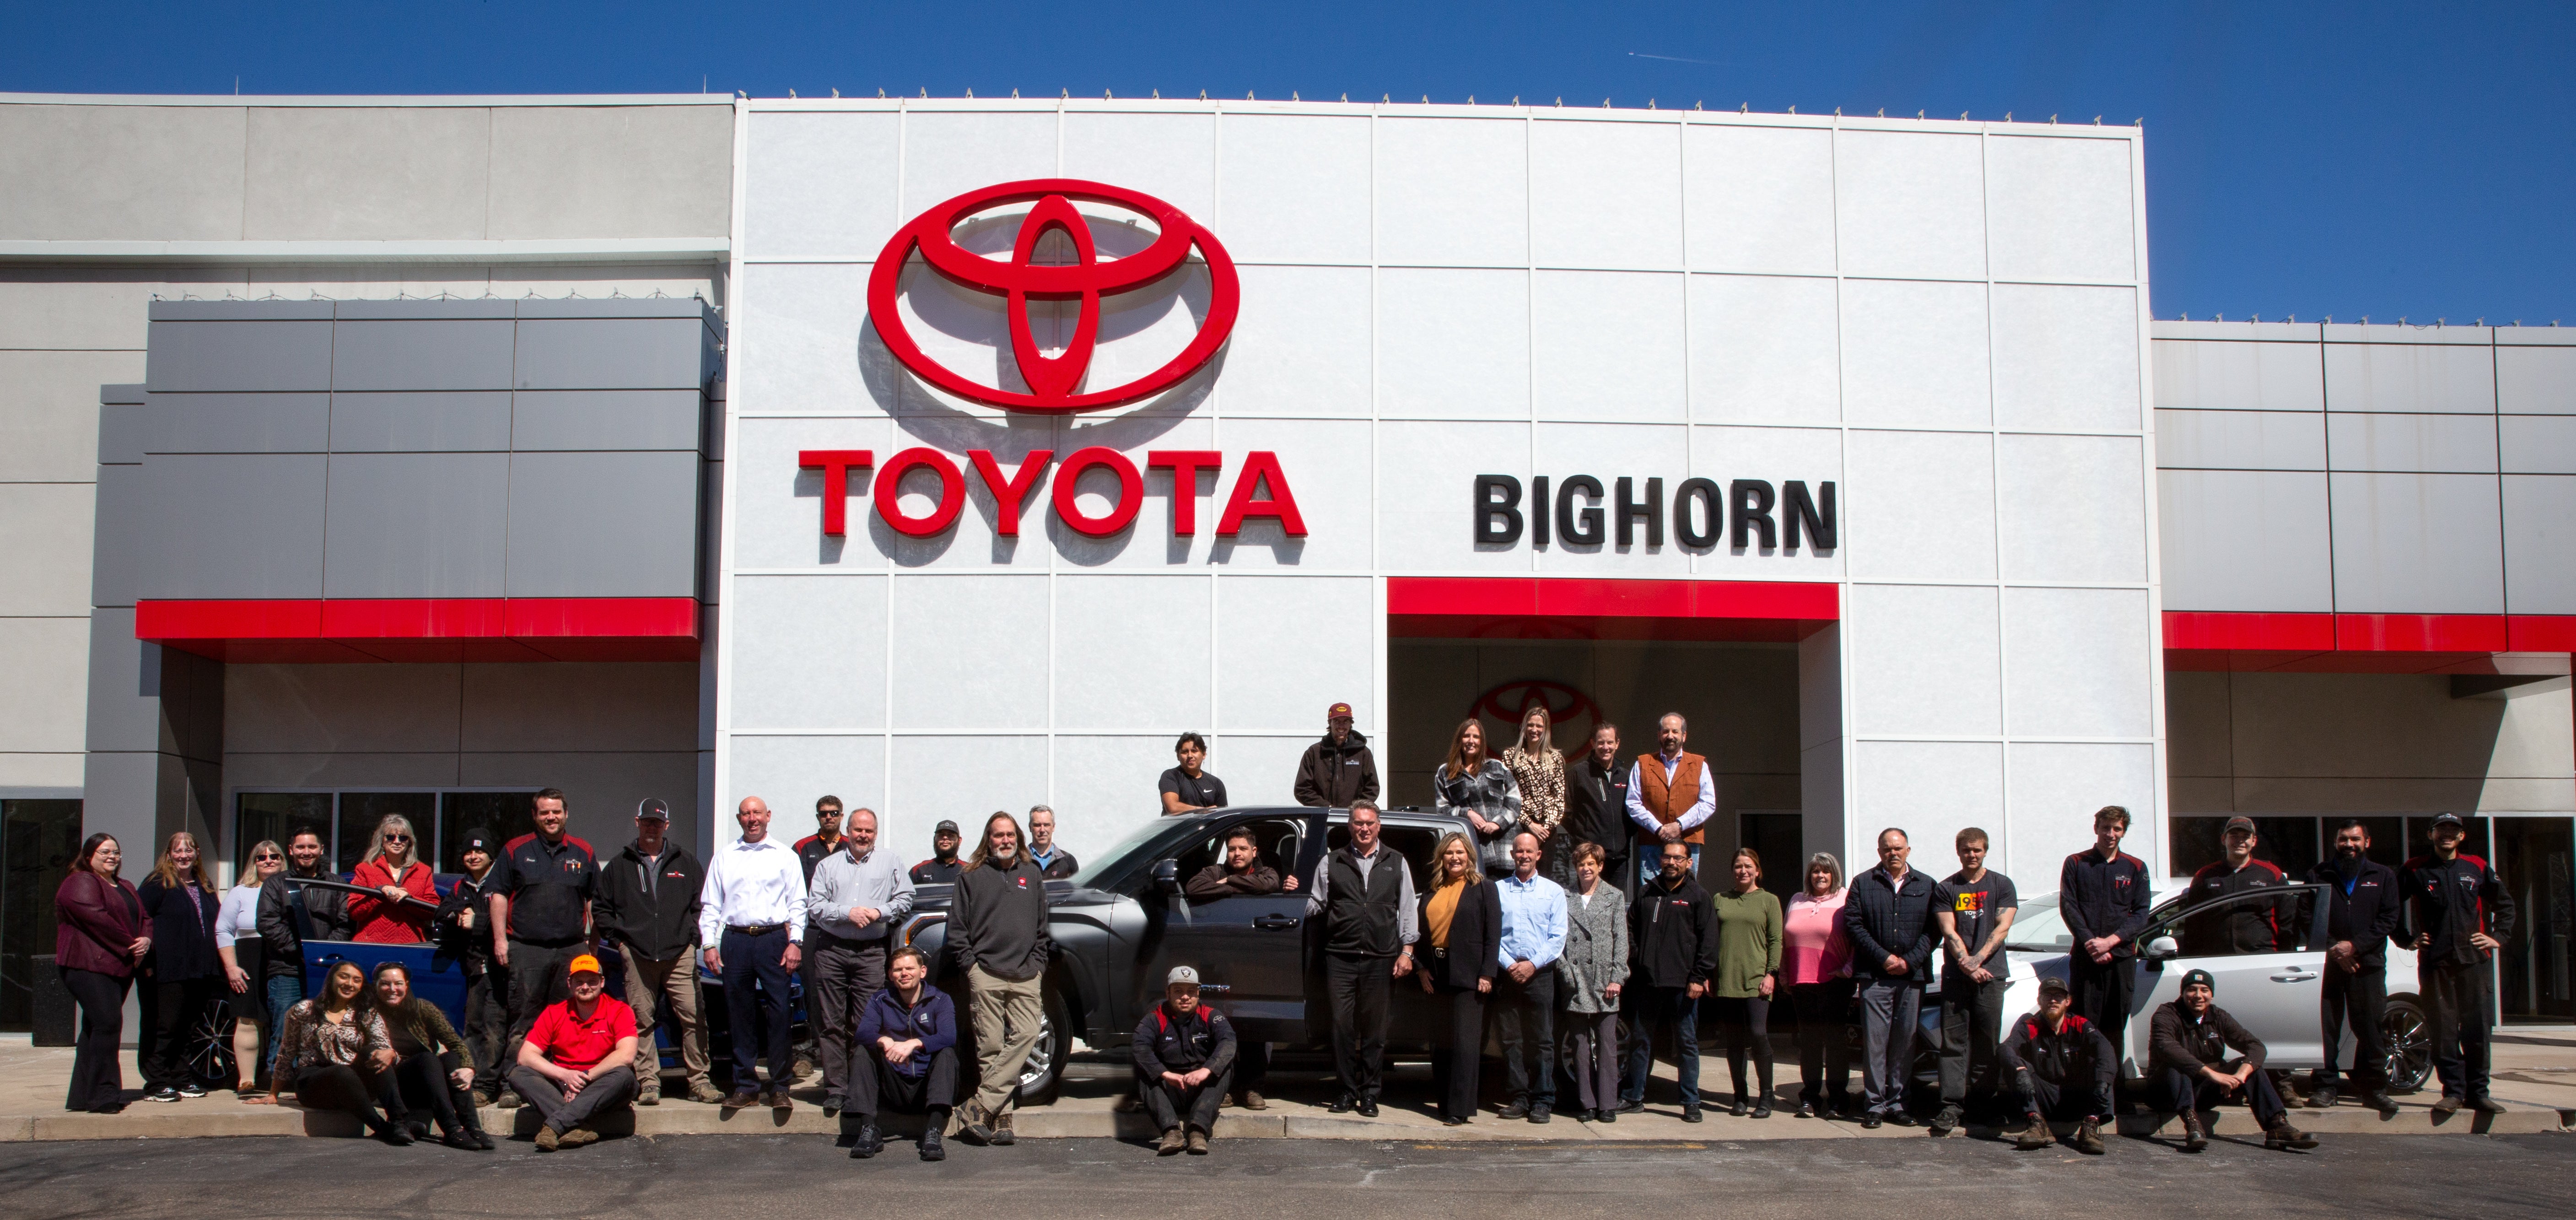 Bighorn Toyota About Us Image